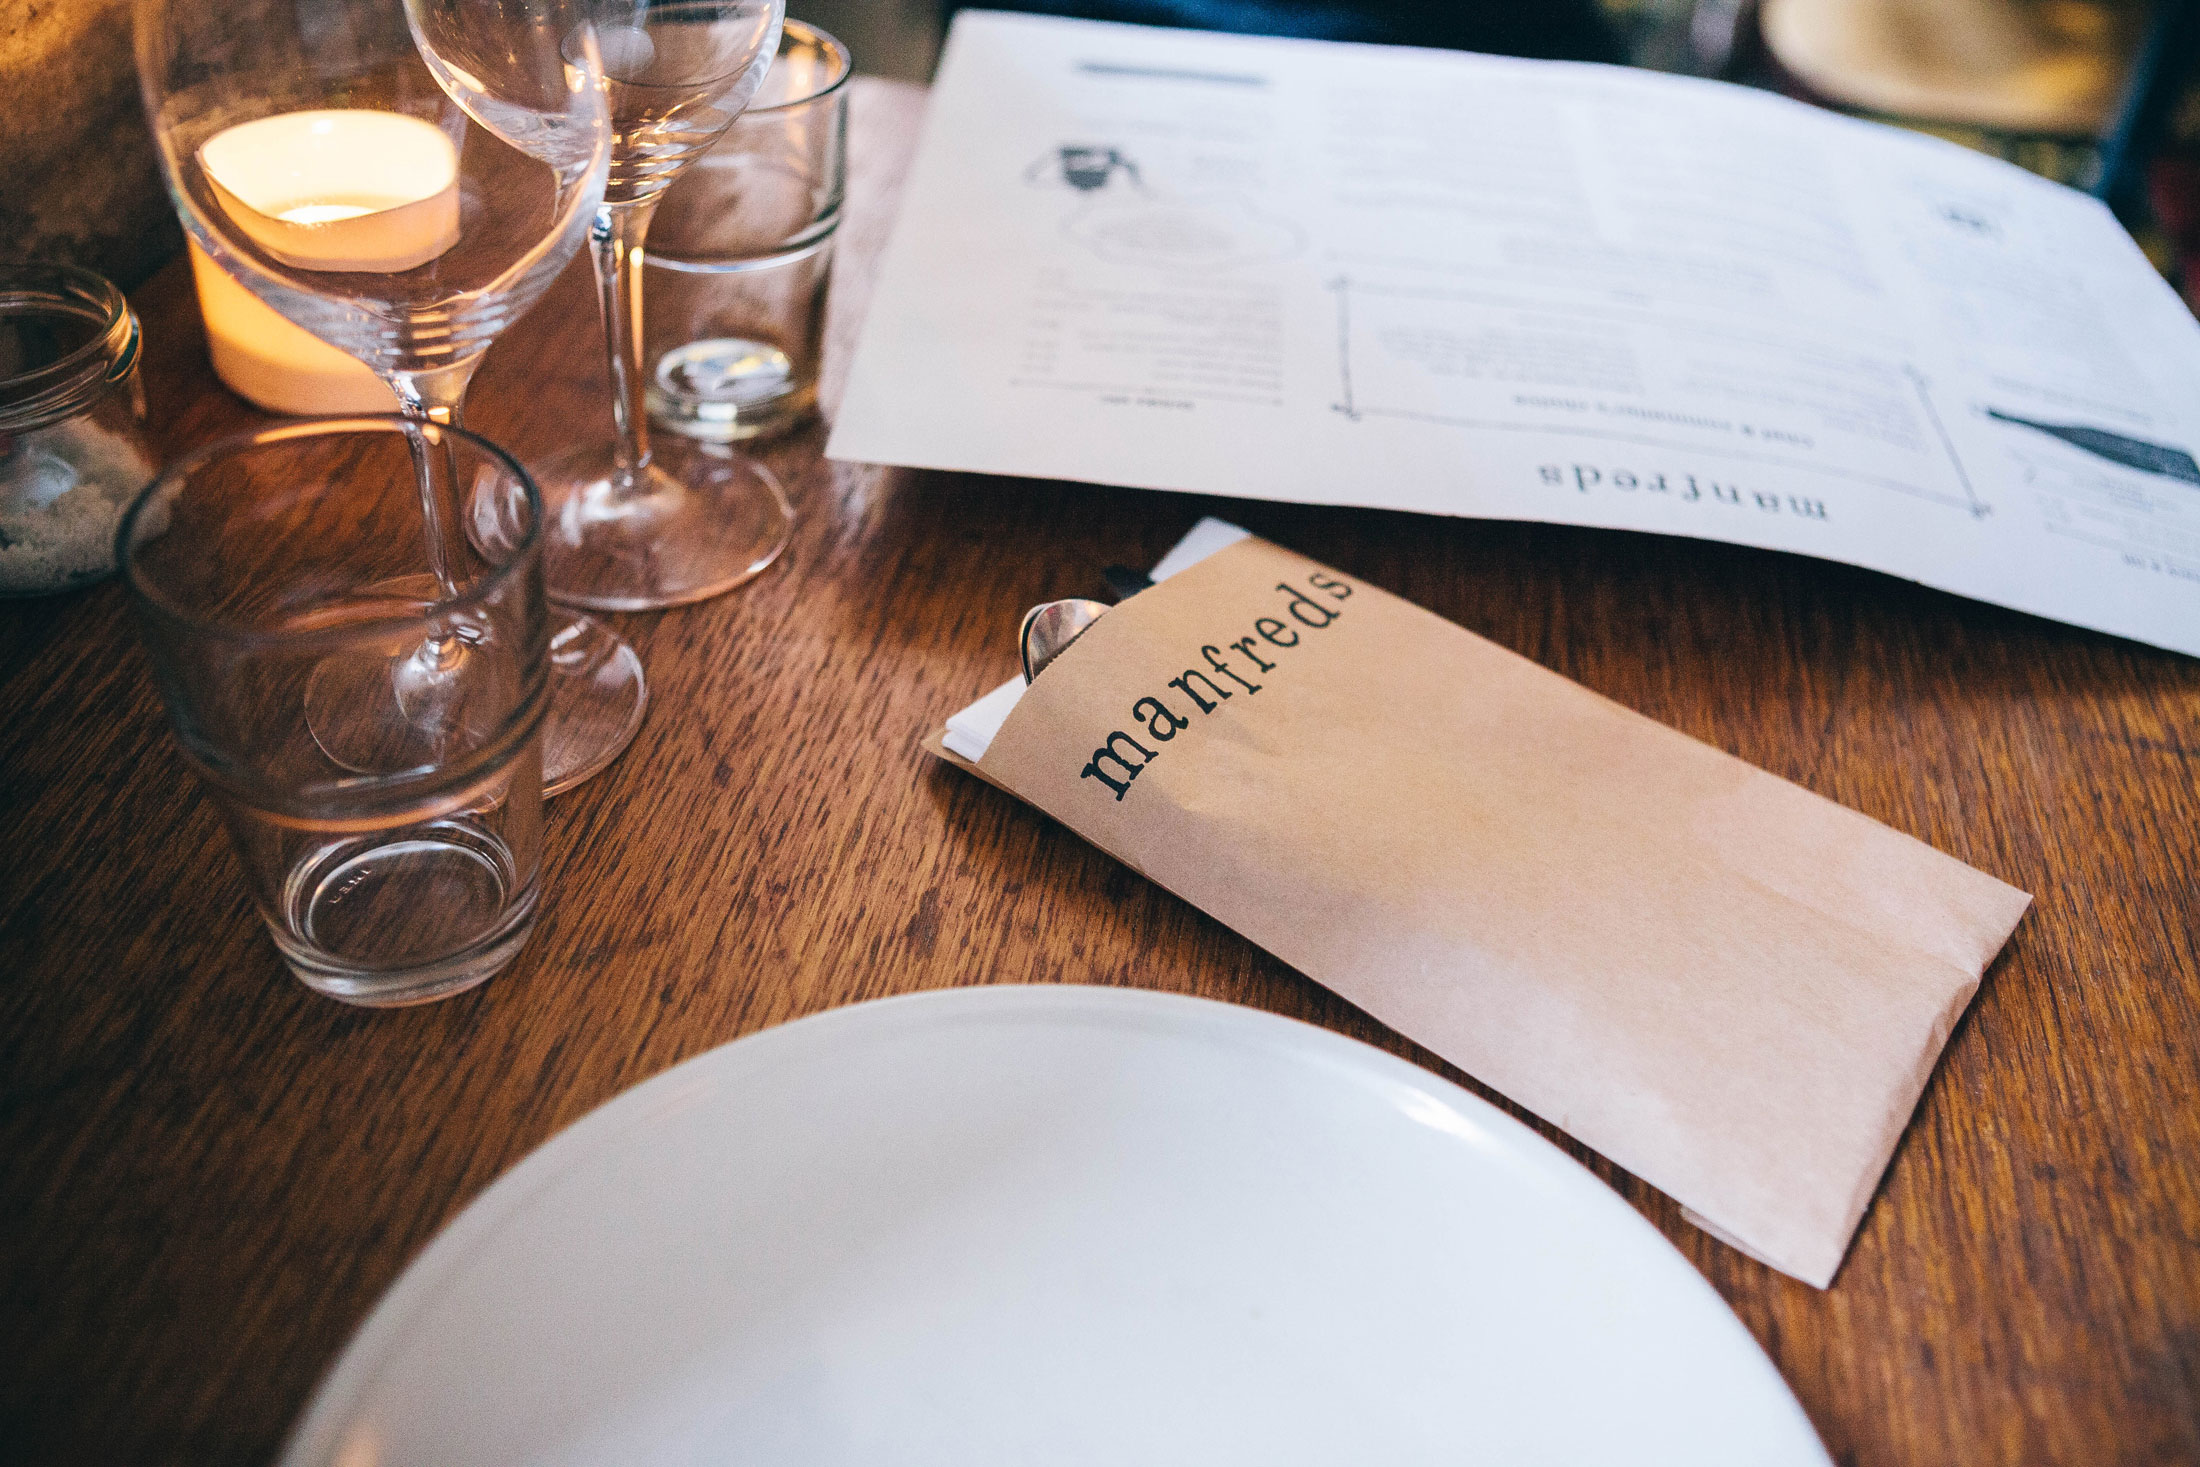 Manfreds is a great restaurant by Noma alumni Christian Puglisi